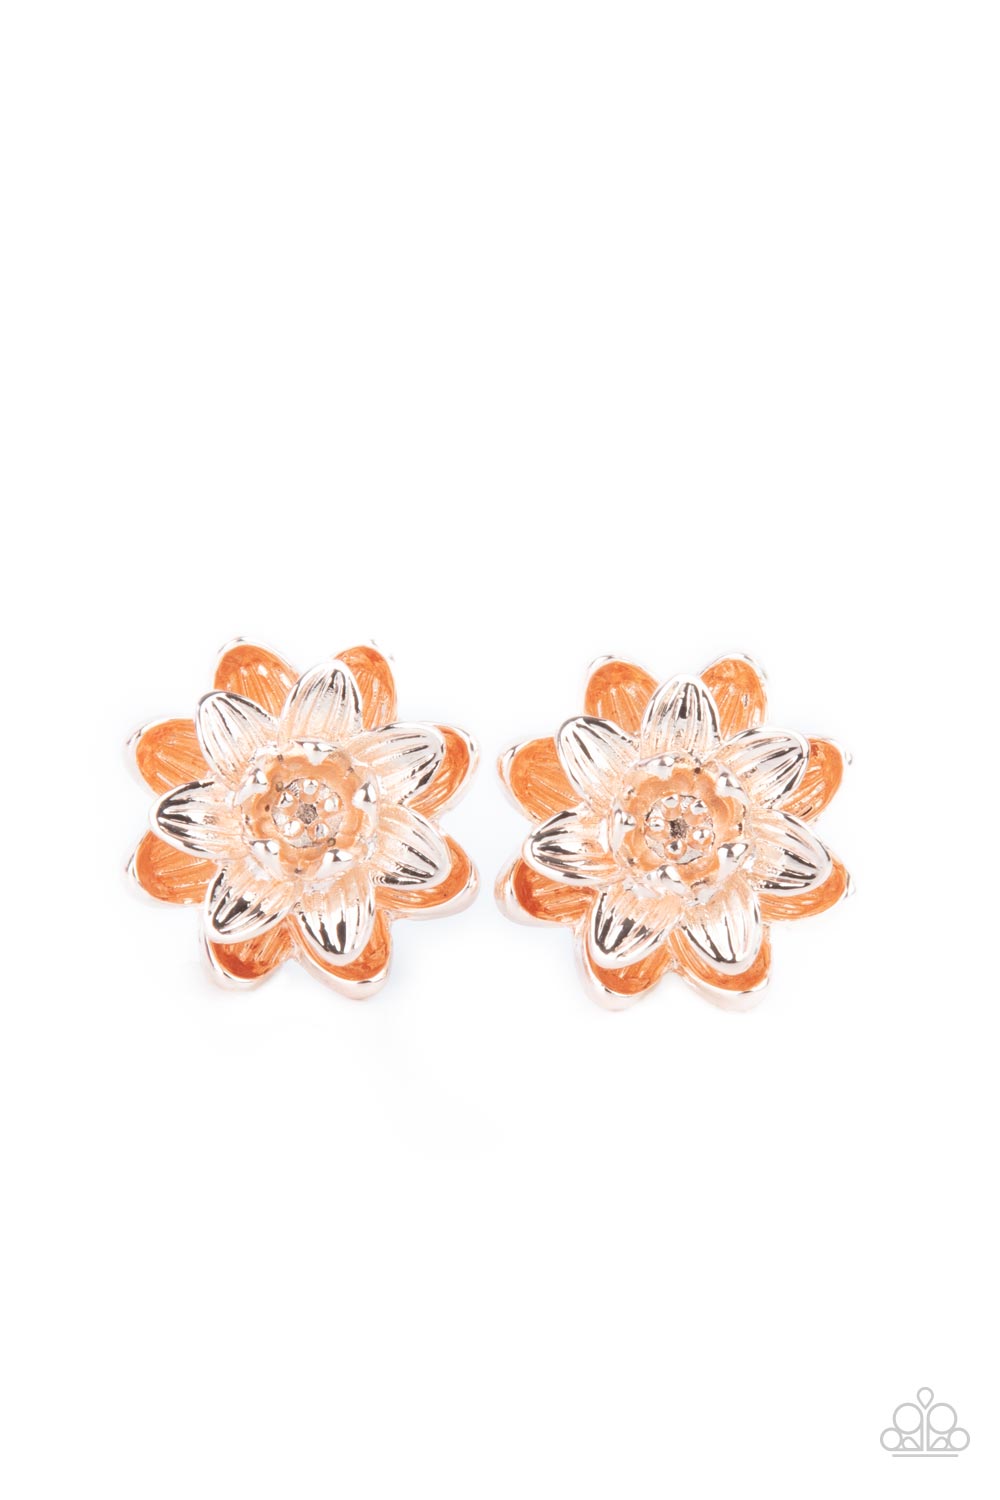 Water Lily Love - Rose Gold - Pretykimsbling